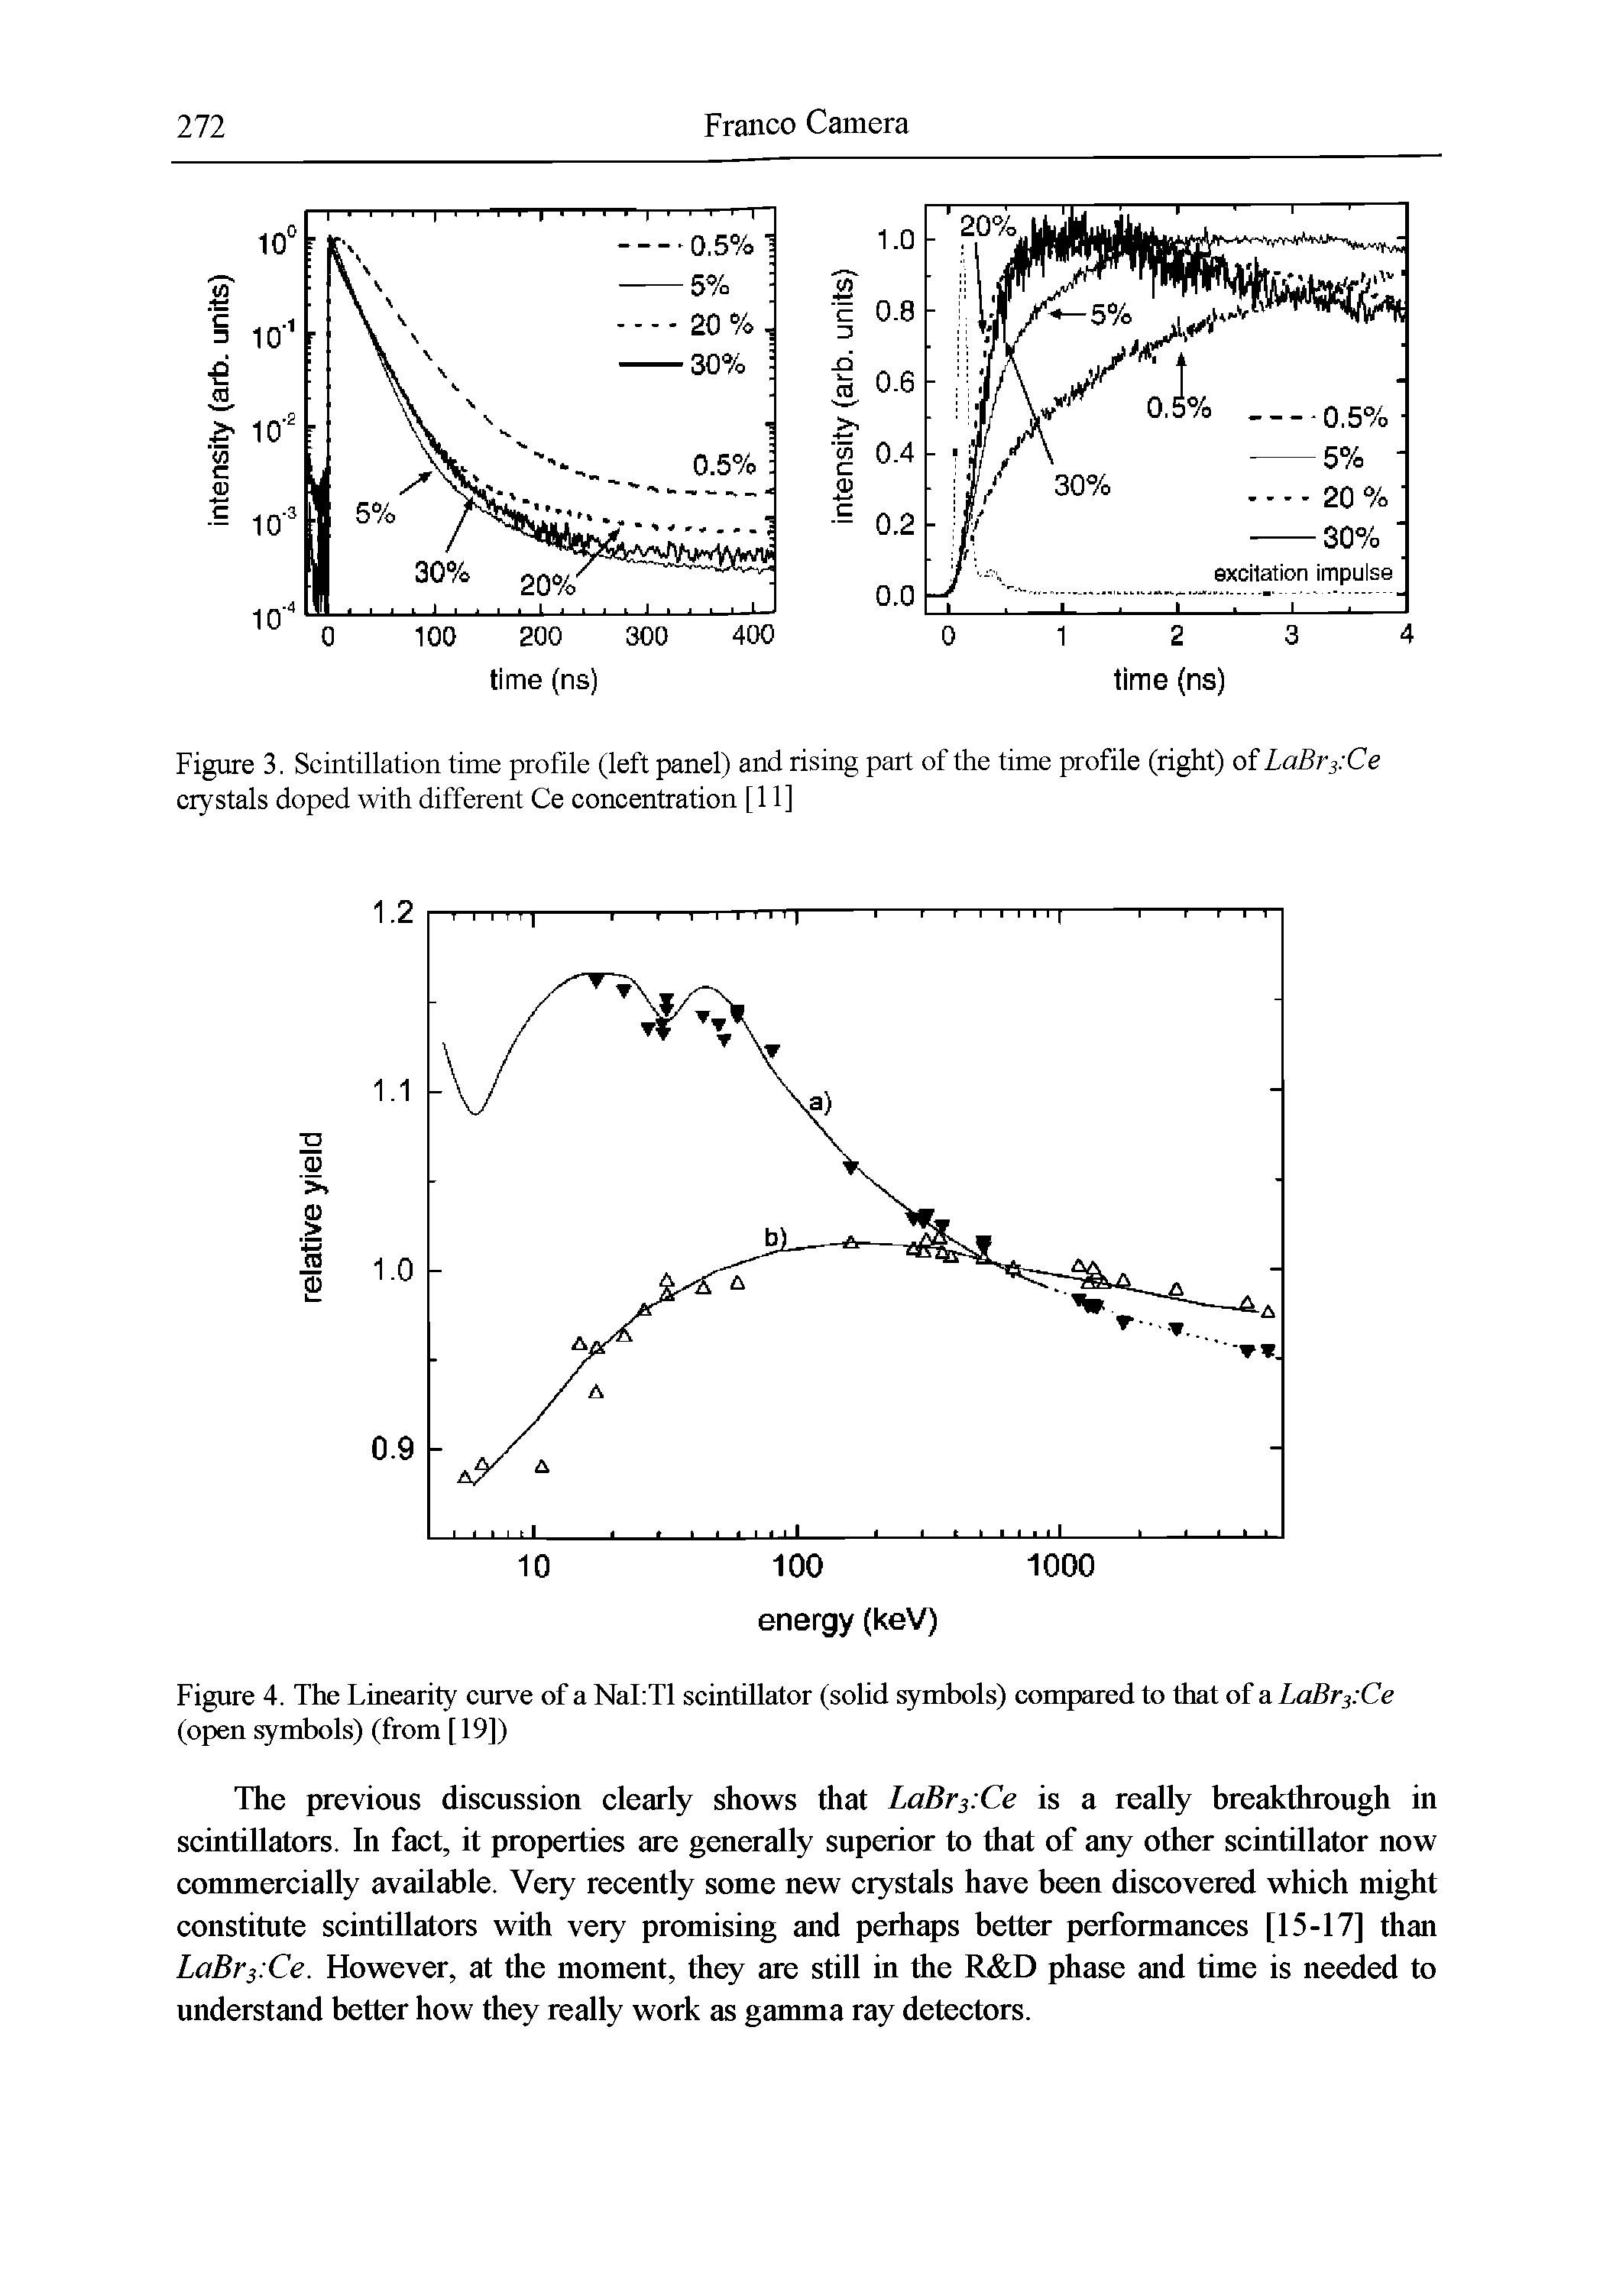 Figure 4. The Linearity curve of a NaLTl scintillator (solid symbols) compared to that of a LaBr. Ce (open symbols) (from [19])...